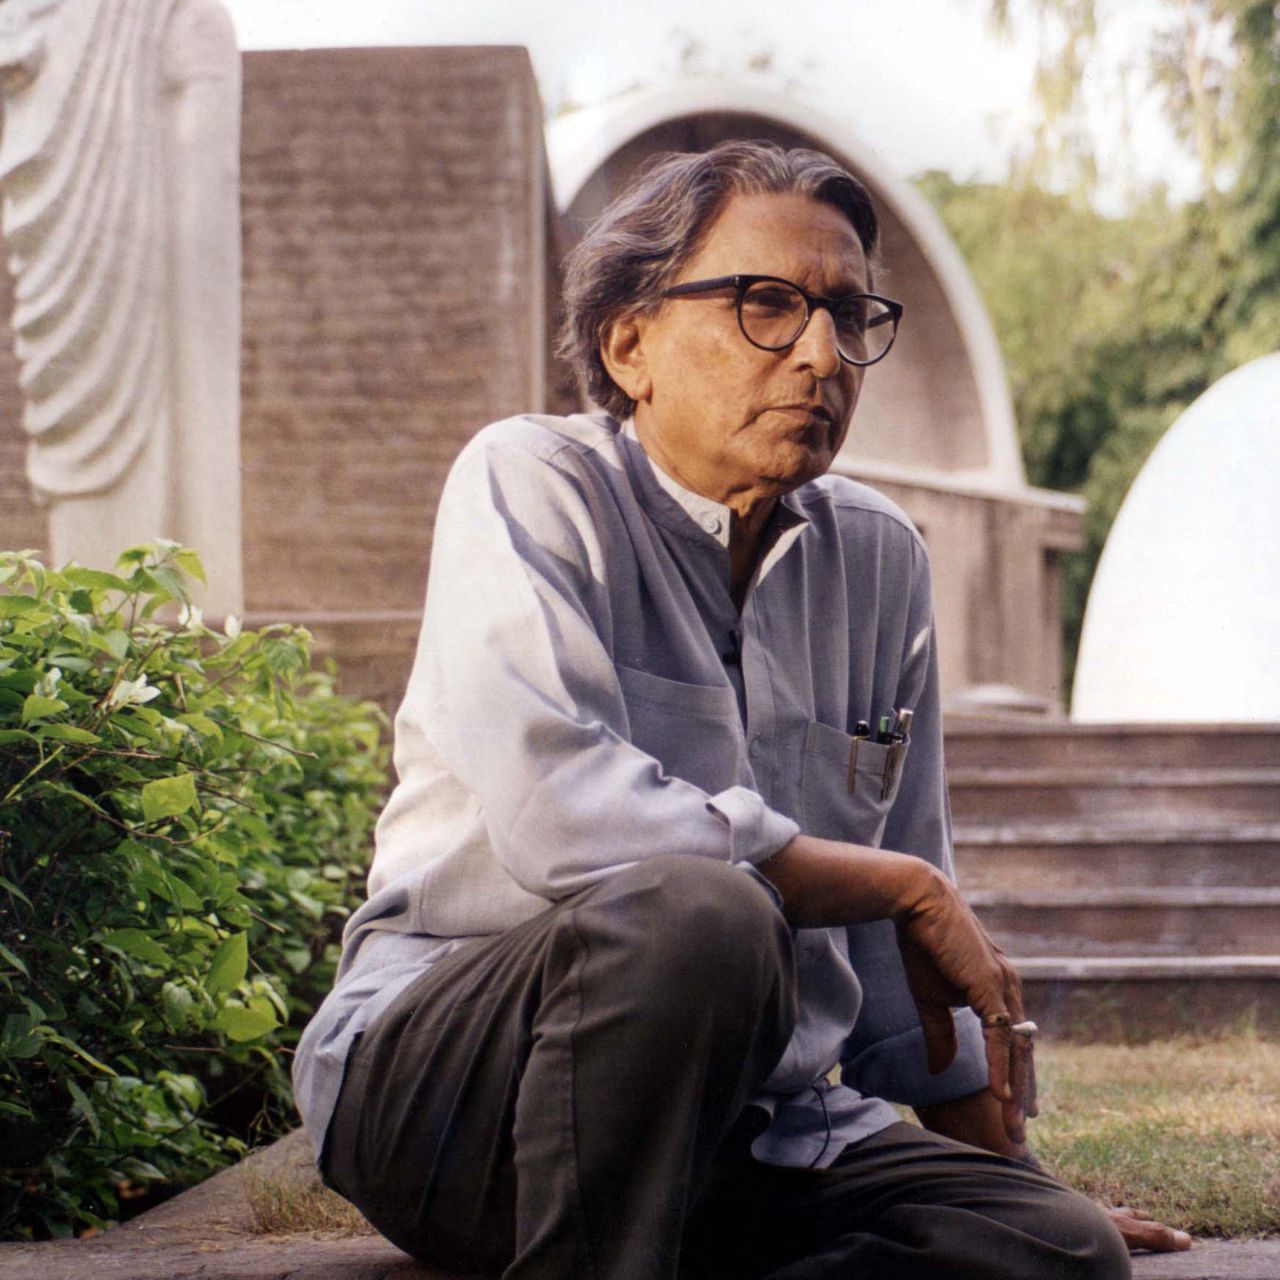 <a href="https://www.cnn.com/style/article/balkrishna-doshi-architect-death/index.html" target="_blank">Balkrishna Doshi</a>, one of the Indian subcontinent's most celebrated architects, died Tuesday, January 24, at the age of 95. He was India's first — and to date, only — winner of the Pritzker Prize, the profession's equivalent to the Nobel Prize.